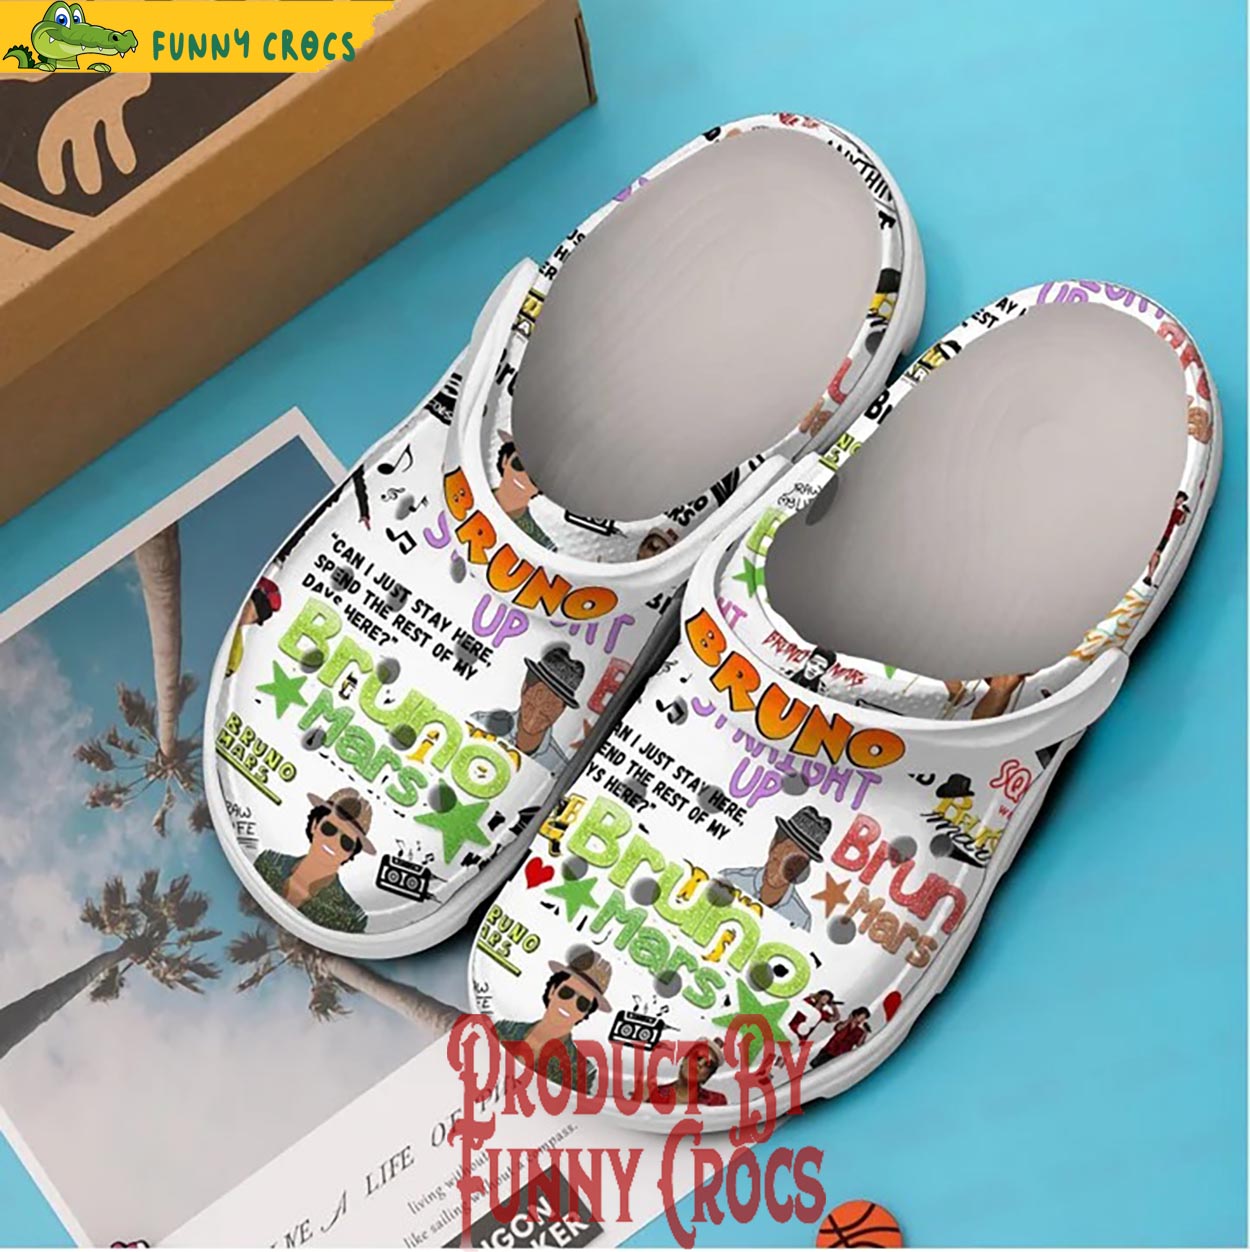 Bruno Mars Straight Up And Down Crocs Shoes - Discover Comfort And ...